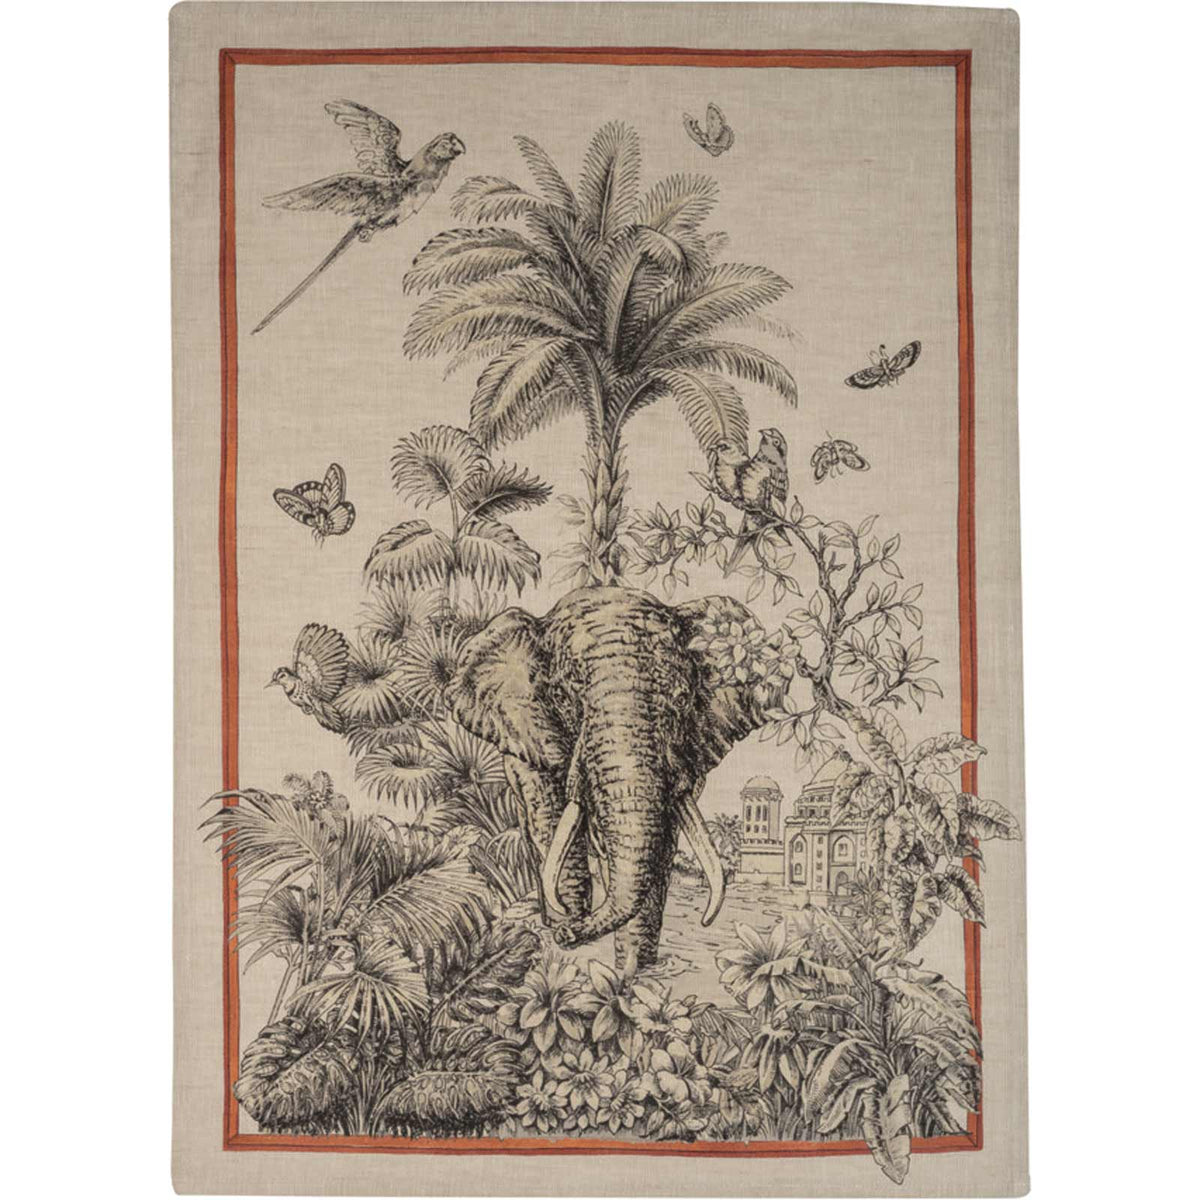 A Morocco Linen Kitchen Towels Set/2 with an elephant and a palm tree made of linen by TTT.